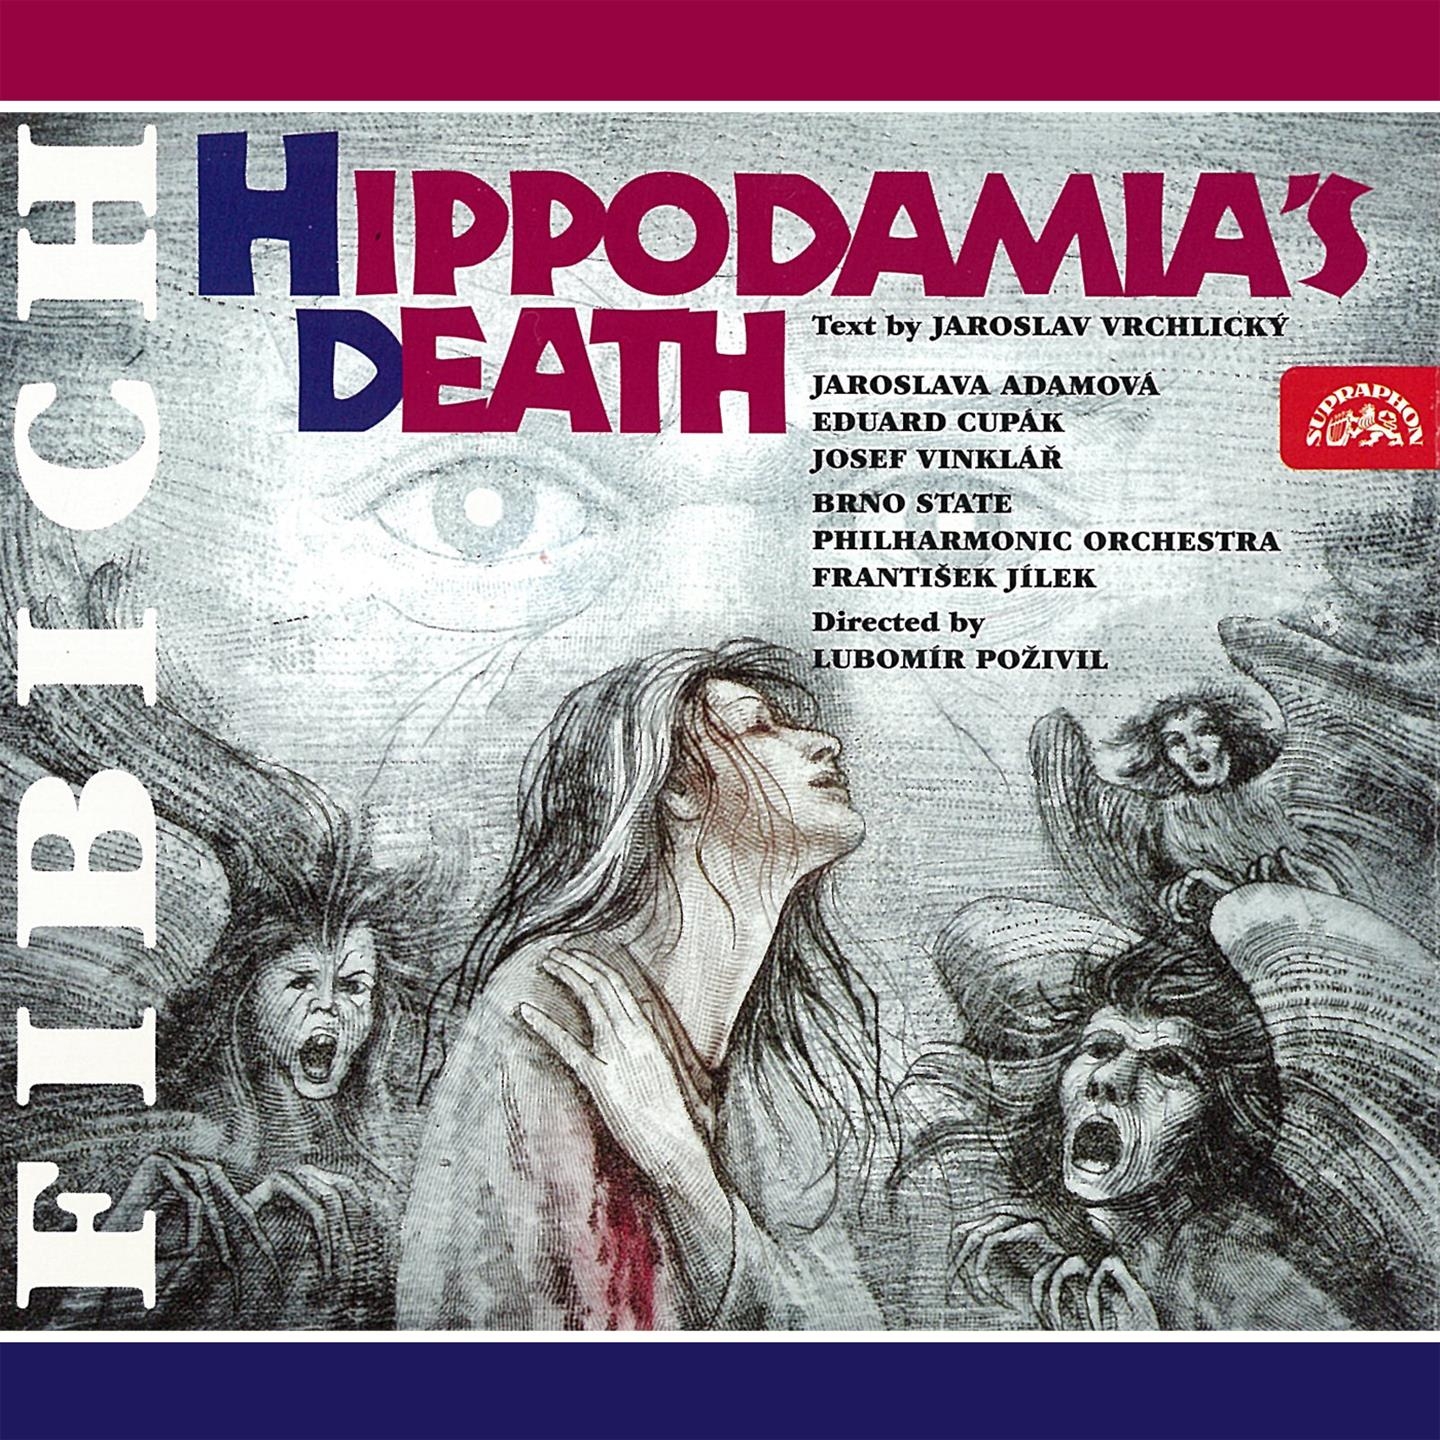 Hippodamia s Death, Op. 33, .: Act 3  Scene Two: Good day, my sovereign!